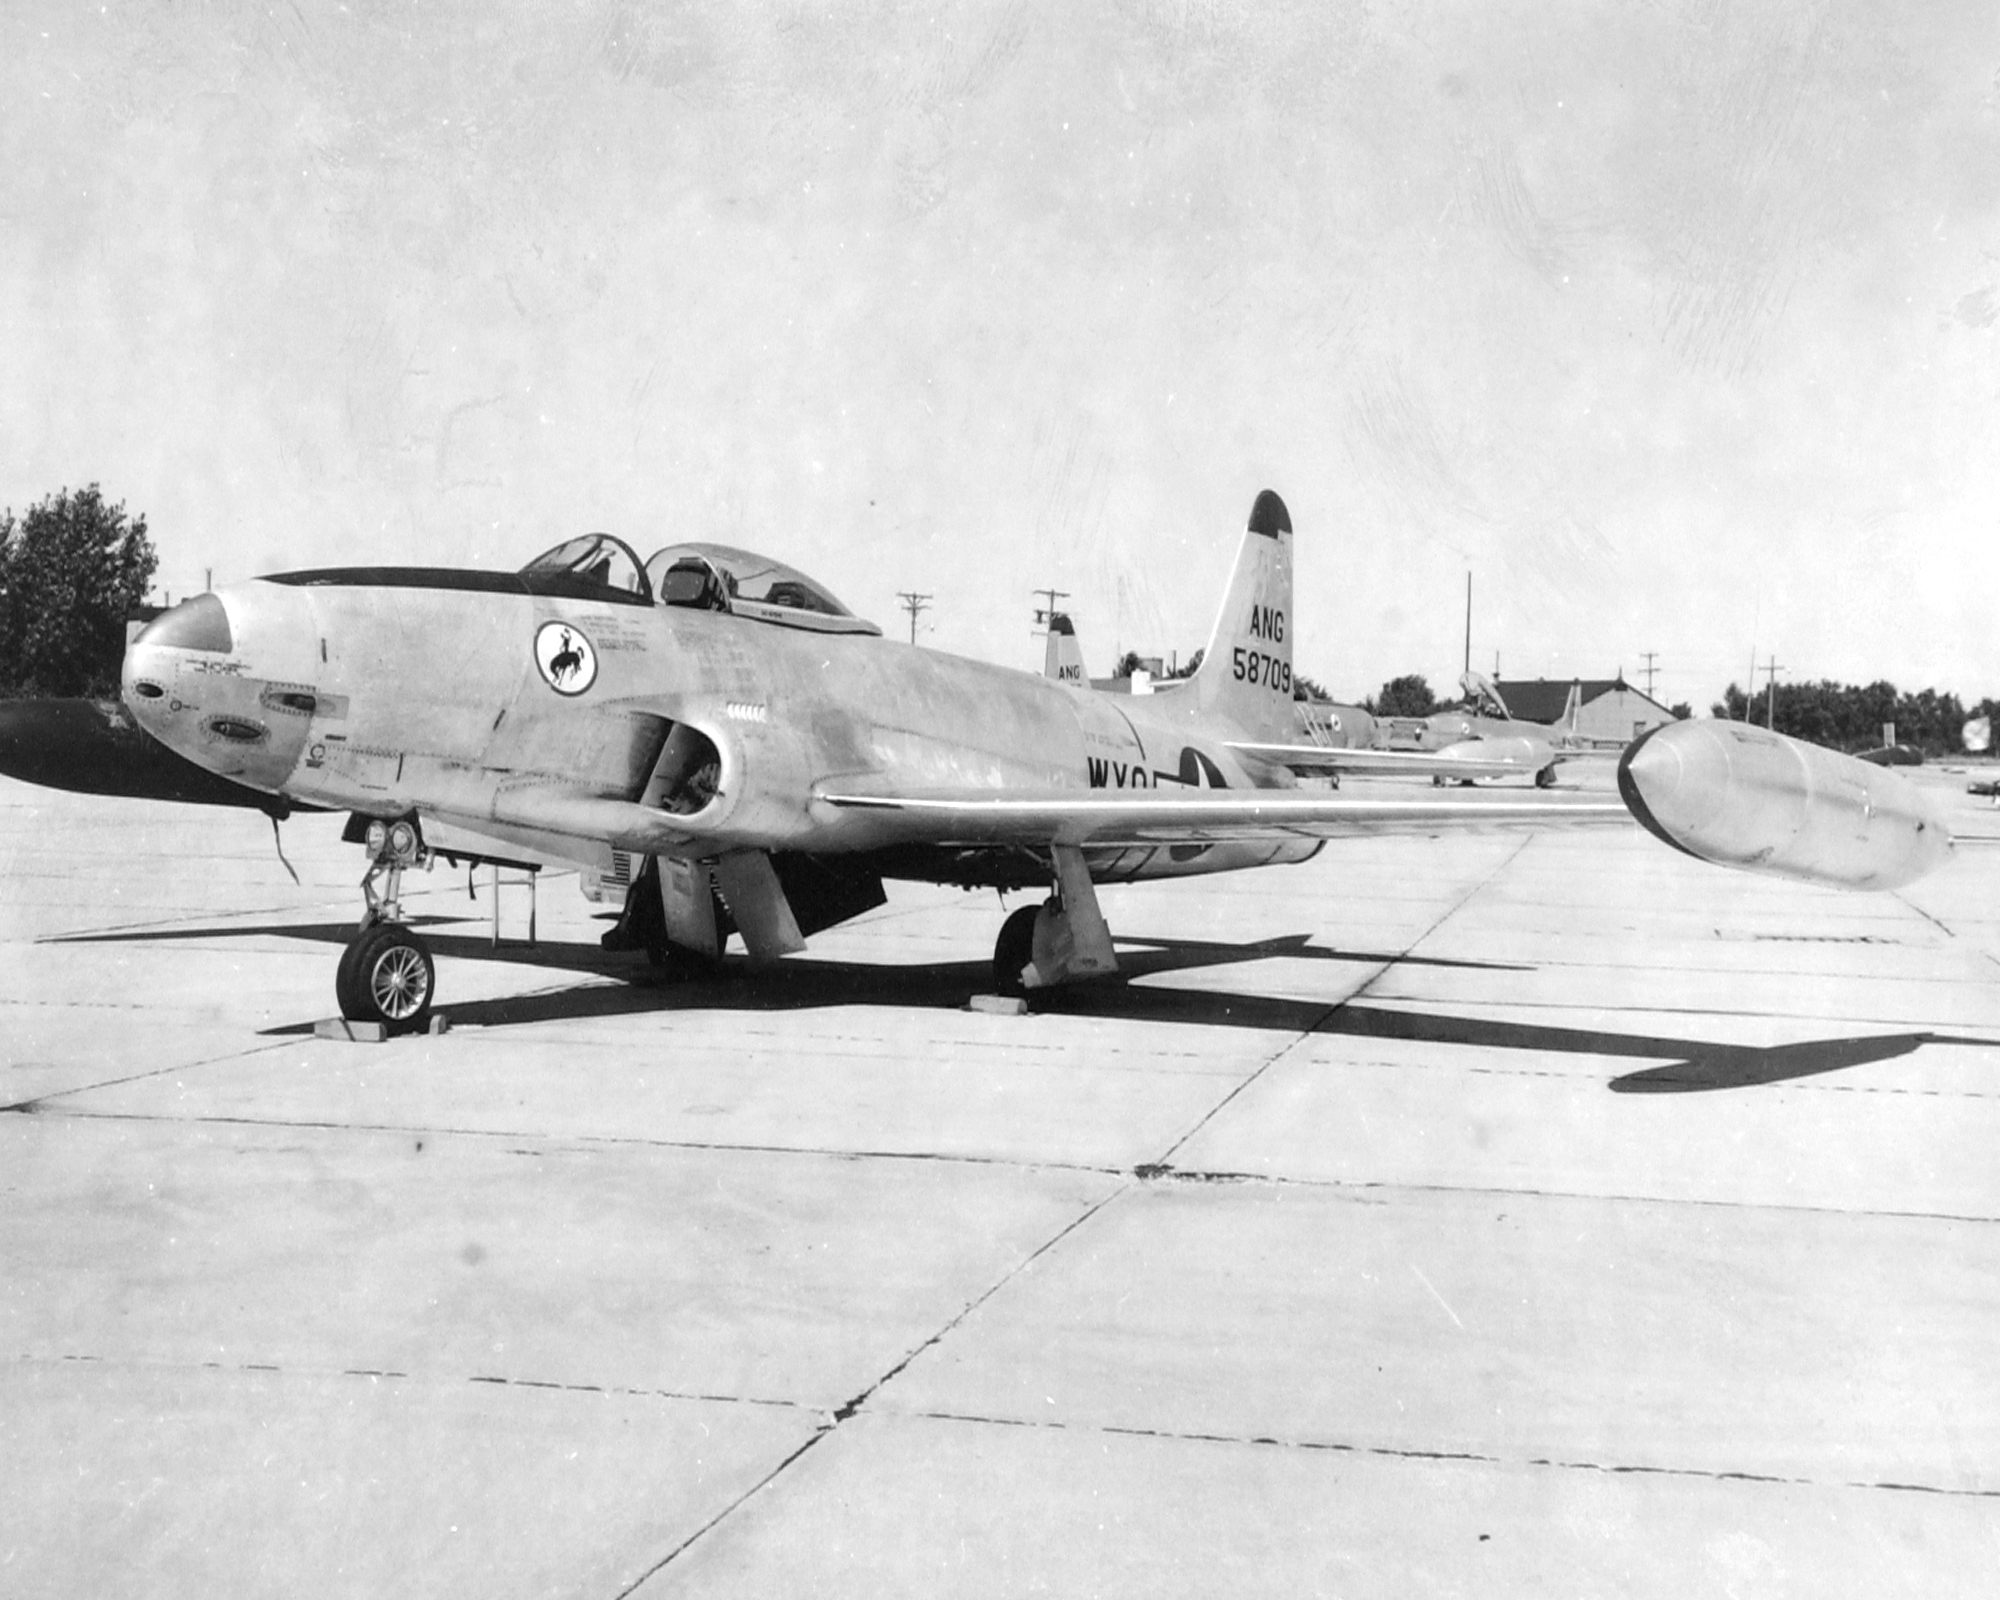 F-80C "Shooting Star" flown from 1953 - 1957